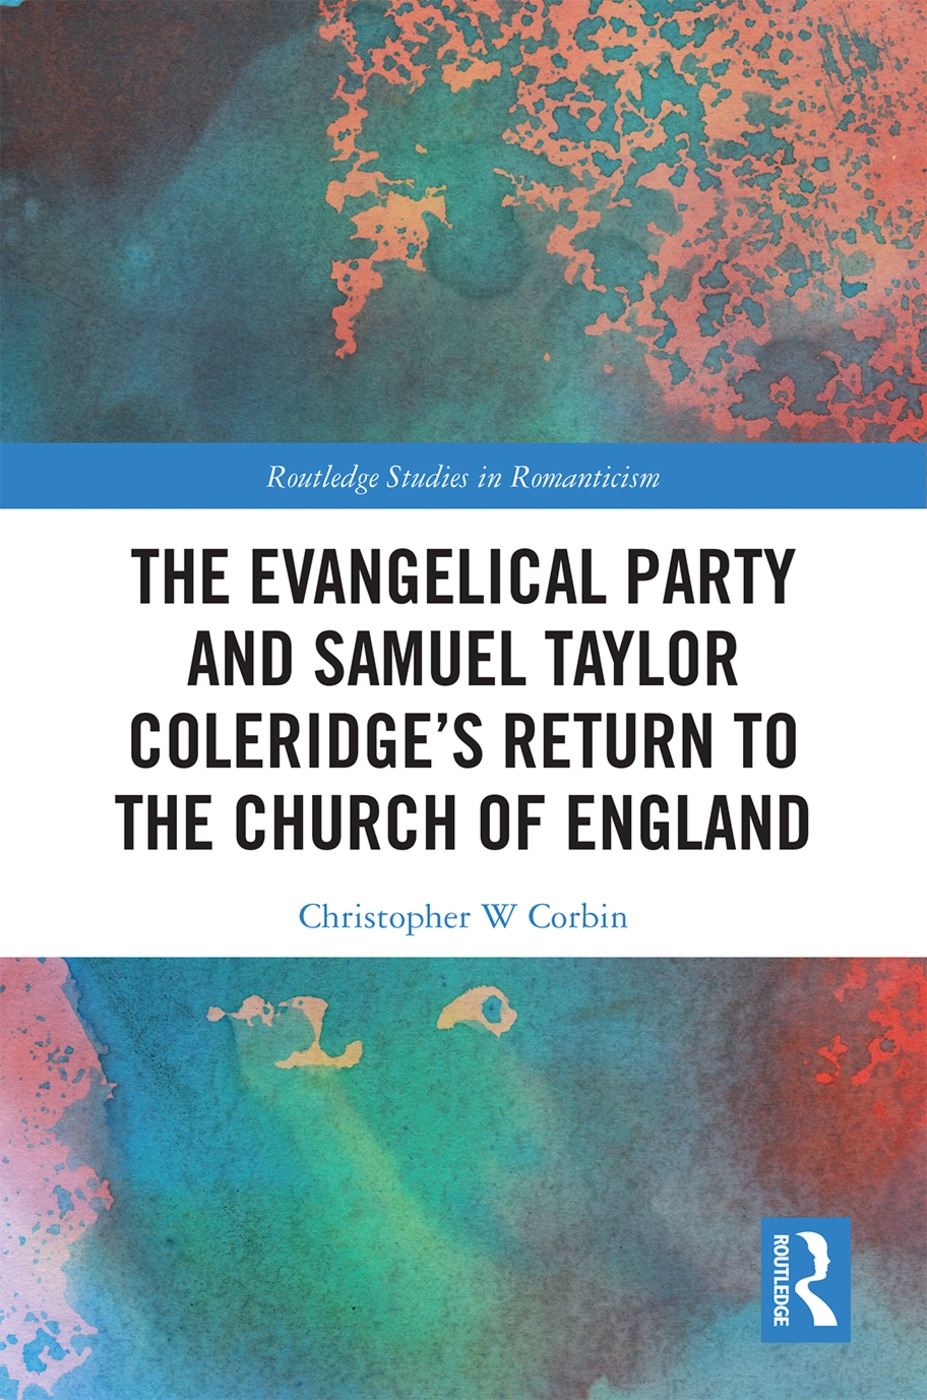 The Evangelical Party and Samuel Taylor Coleridge’s Return to the Church of England